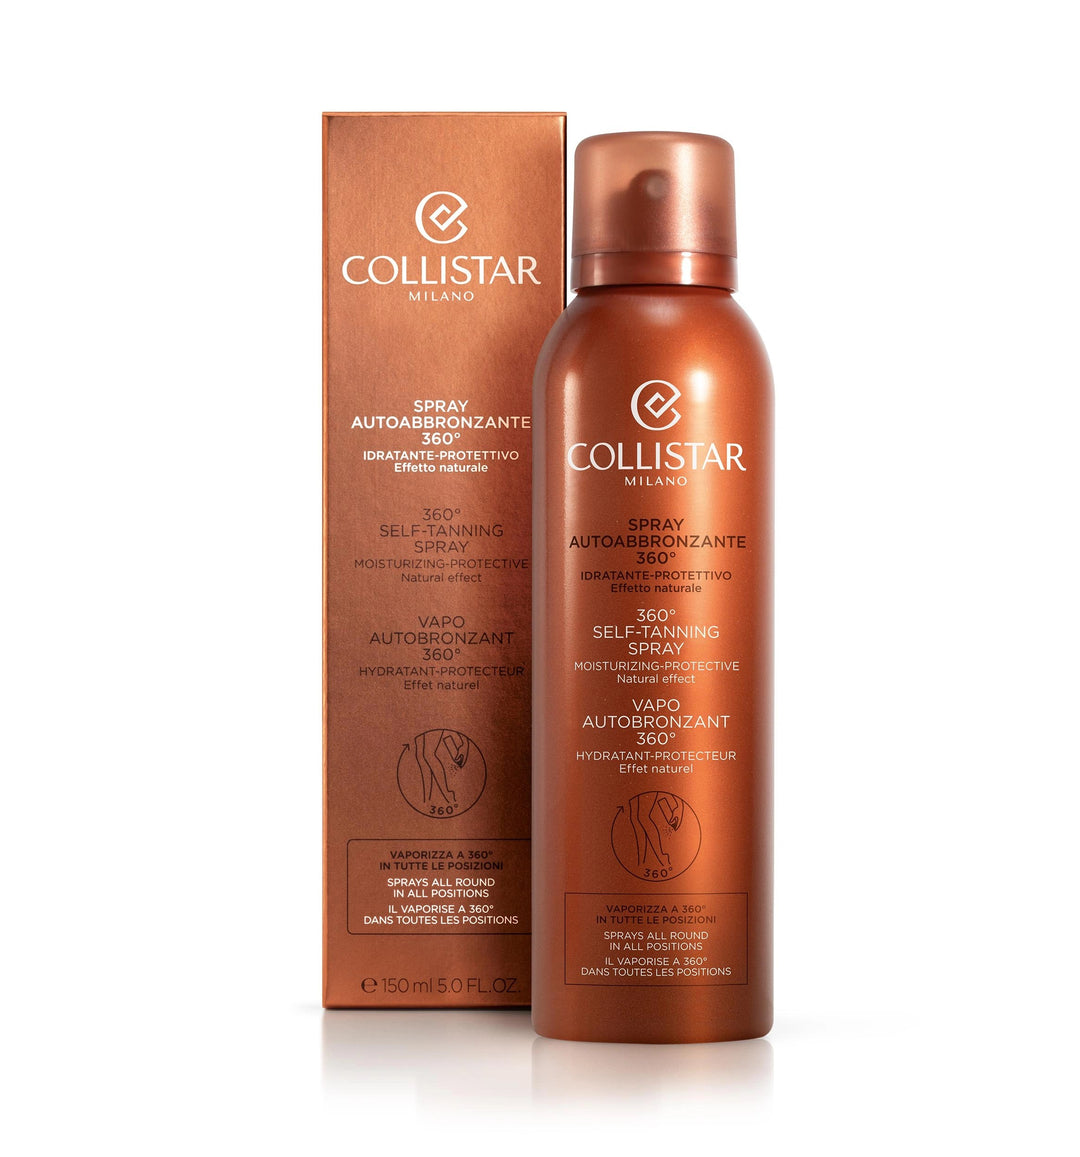 

Collistar Self-Tanning Spray 360° Moisturizing and Protective Natural Effect 150 ml